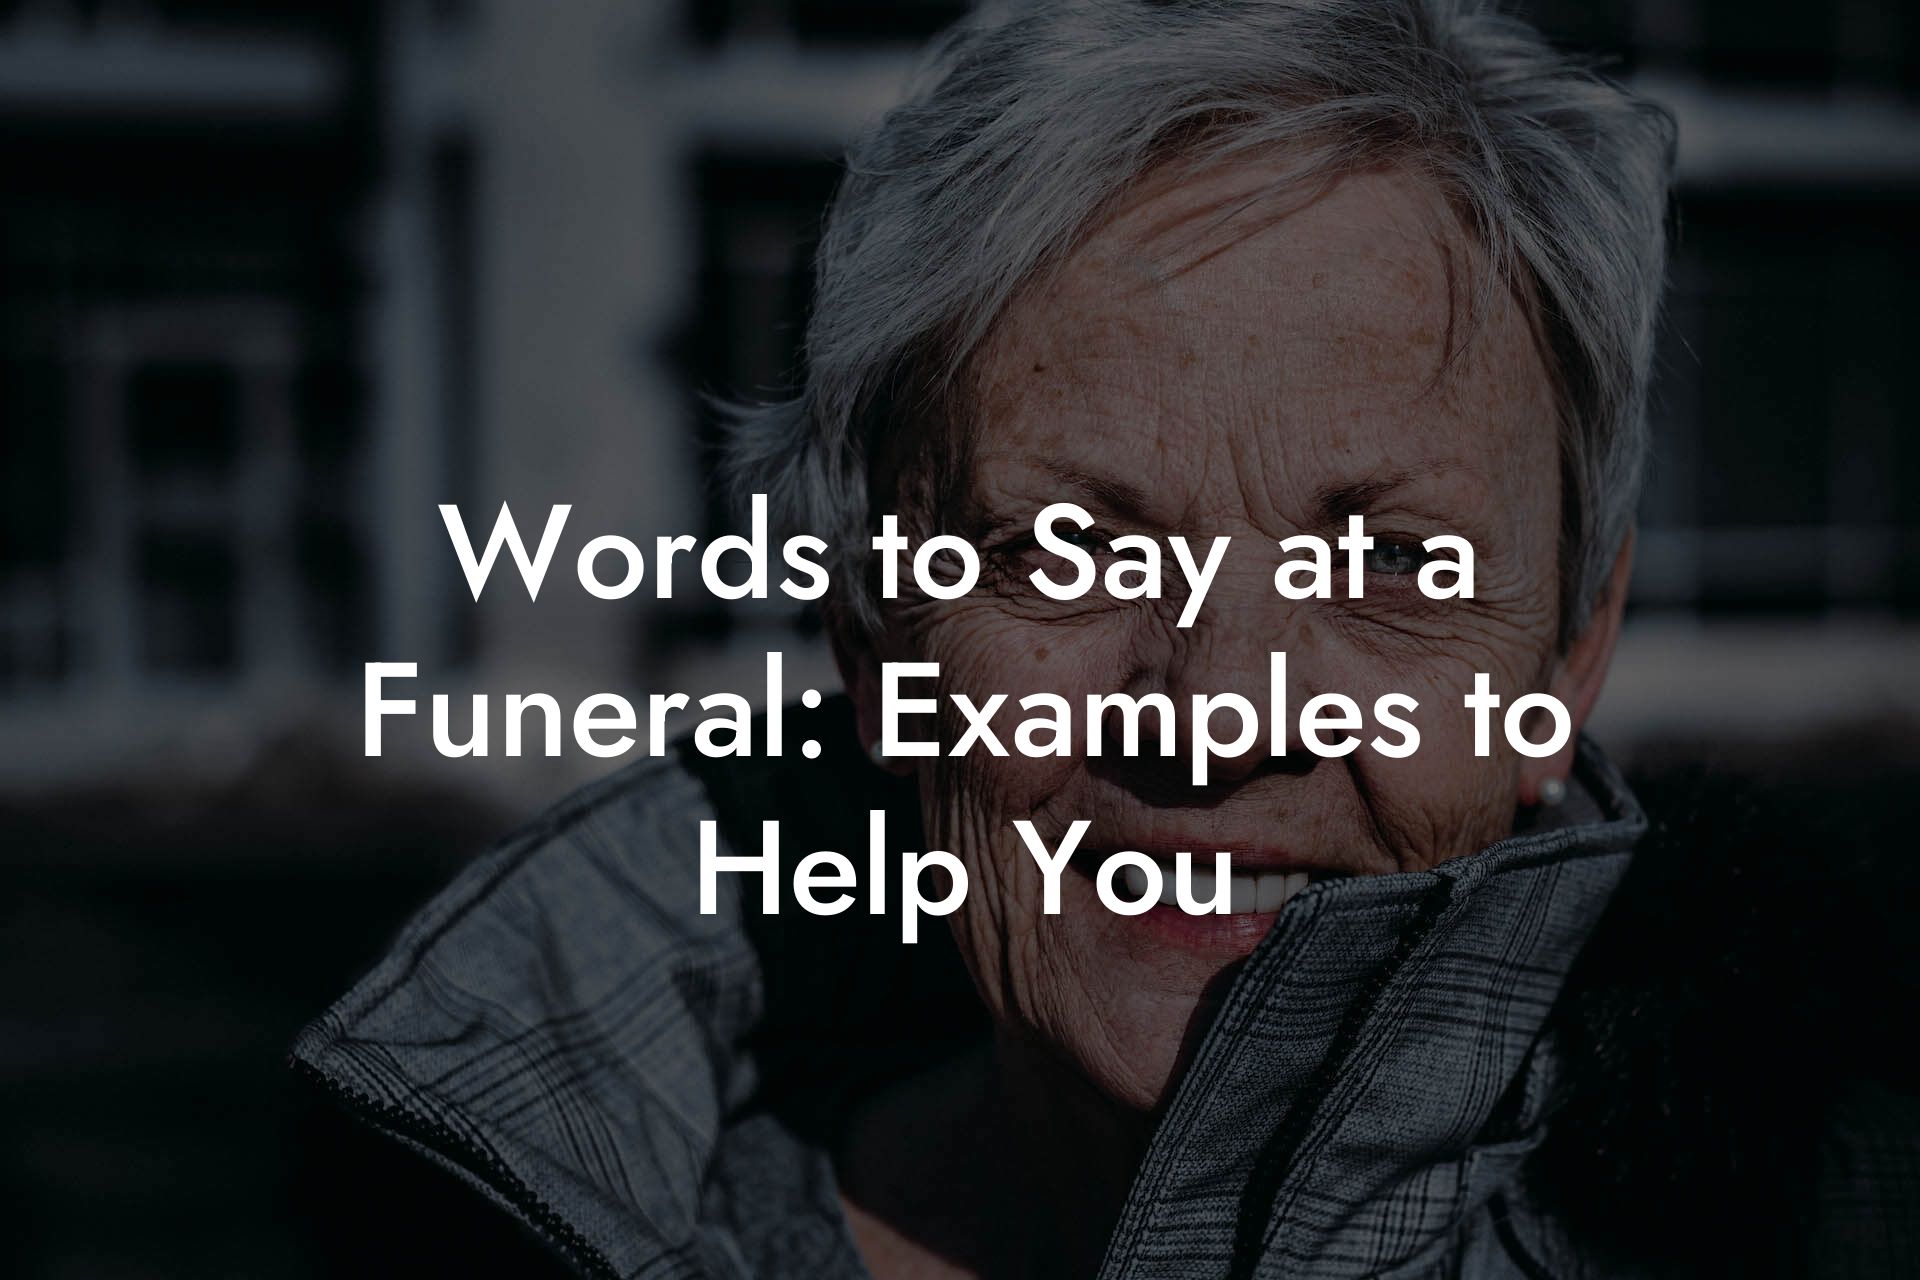 Words to Say at a Funeral: Examples to Help You